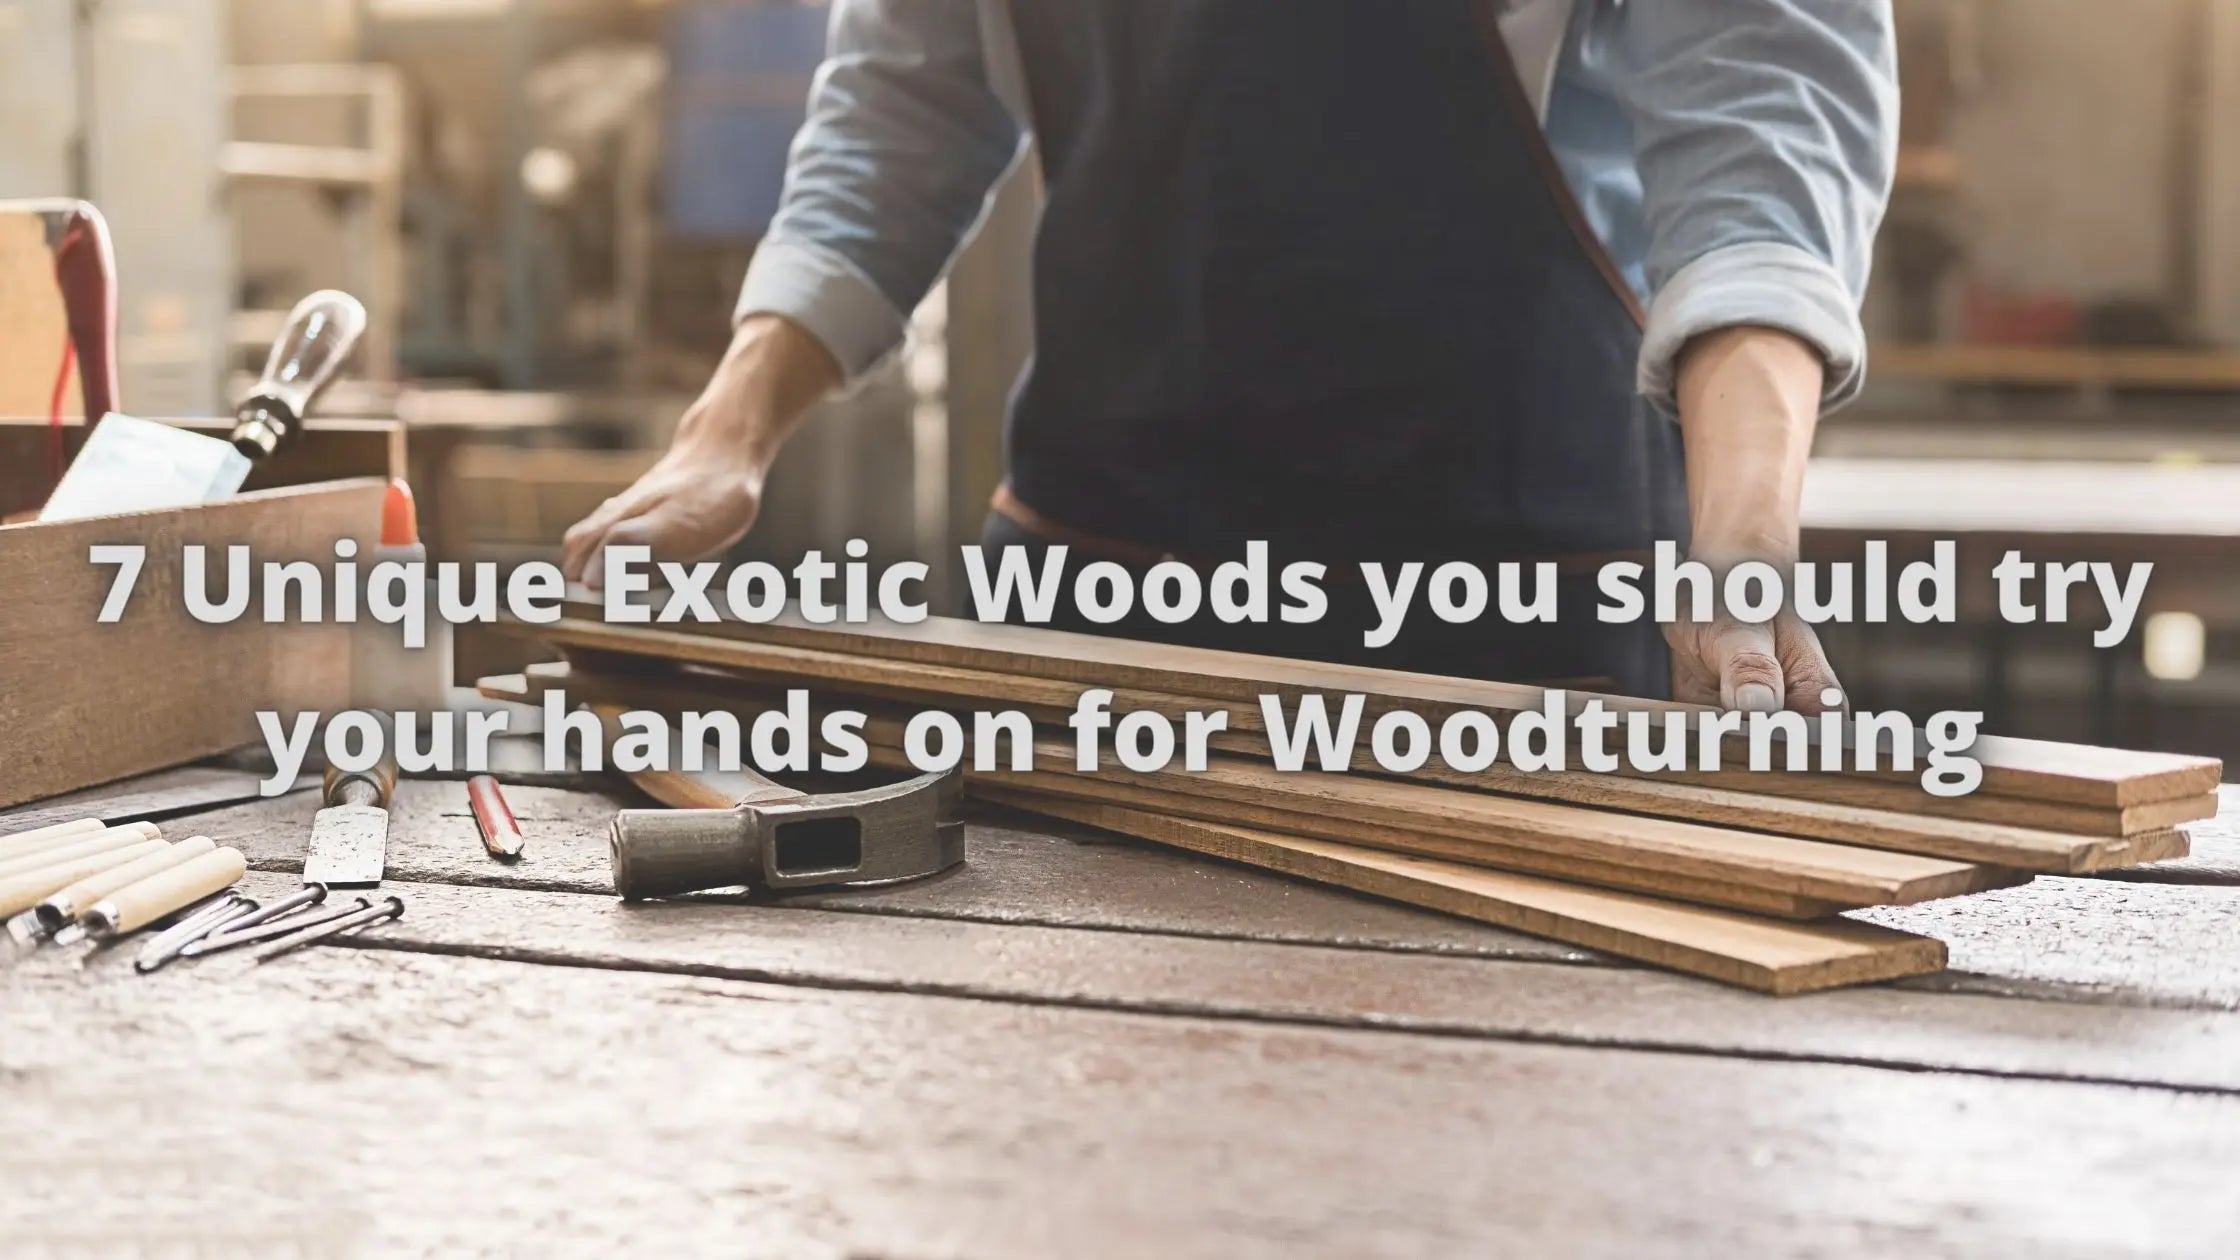 7 Unique Exotic Woods you should try your hands on for Woodturning